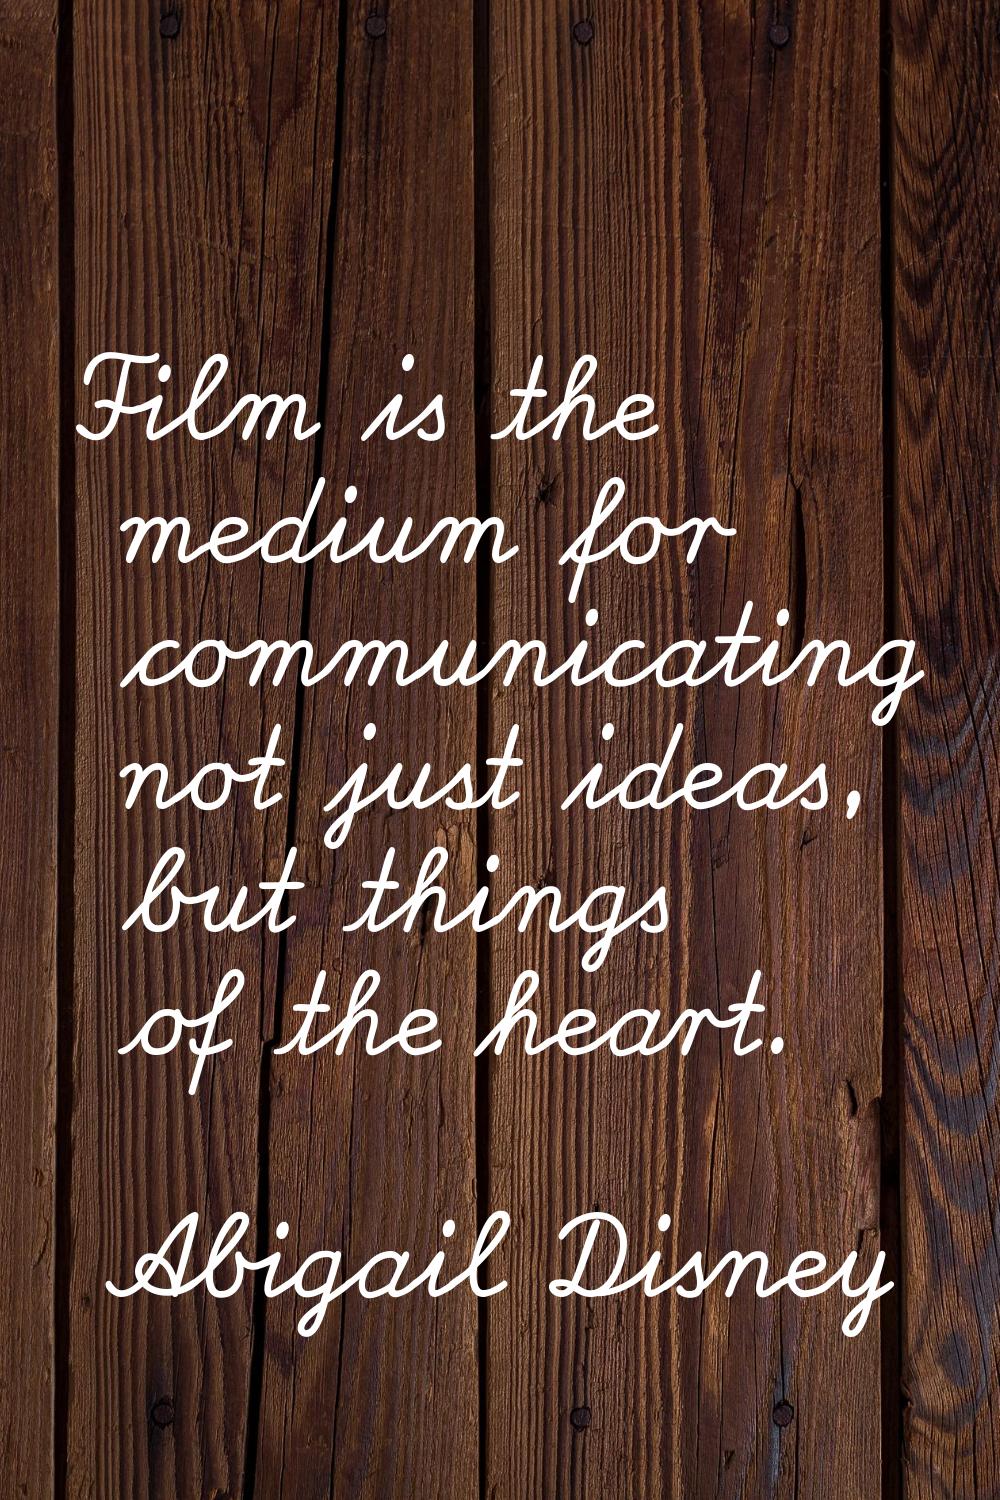 Film is the medium for communicating not just ideas, but things of the heart.